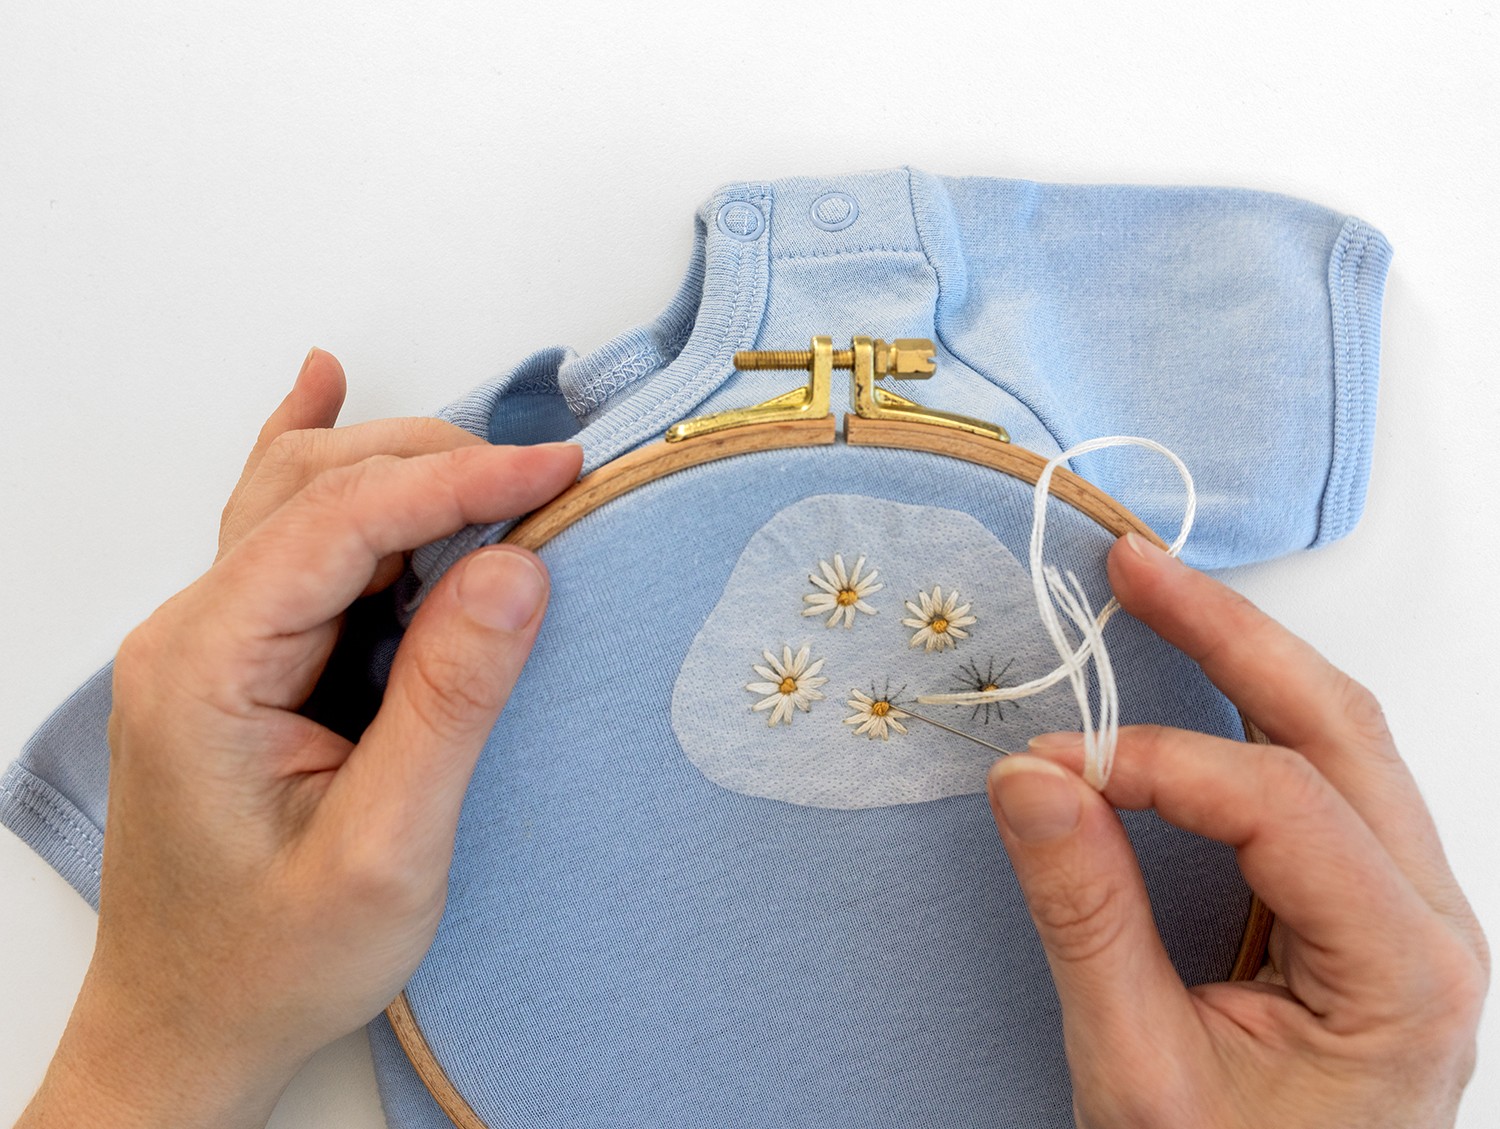 Daisies are sewn in a shirt.